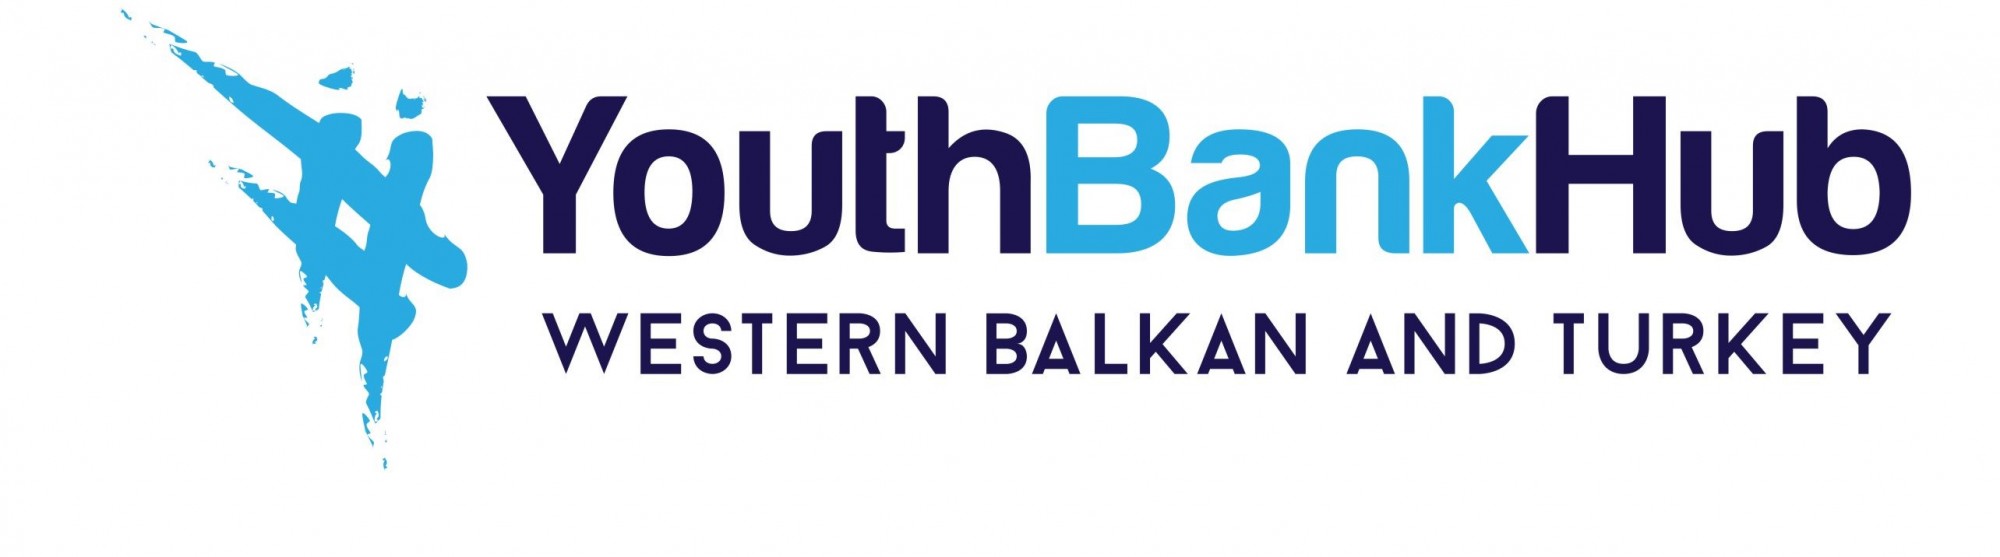 New members of Youth Bank Hub for Western Balkan and Turkey network